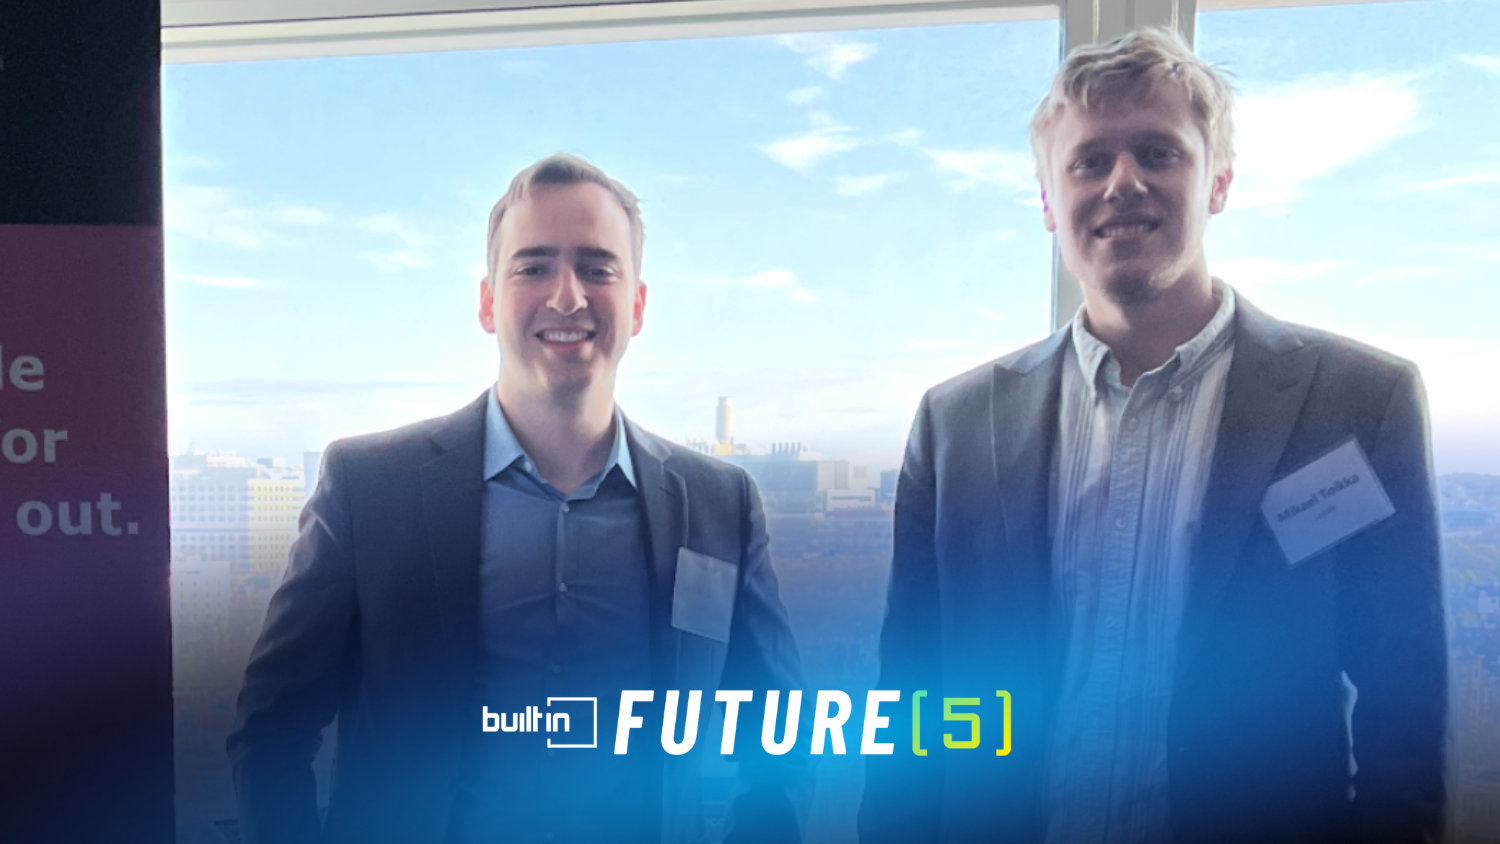 Locale co-founders Daniel Starr (left) and Mikael Toikka (right) stand for a photo at a conference.